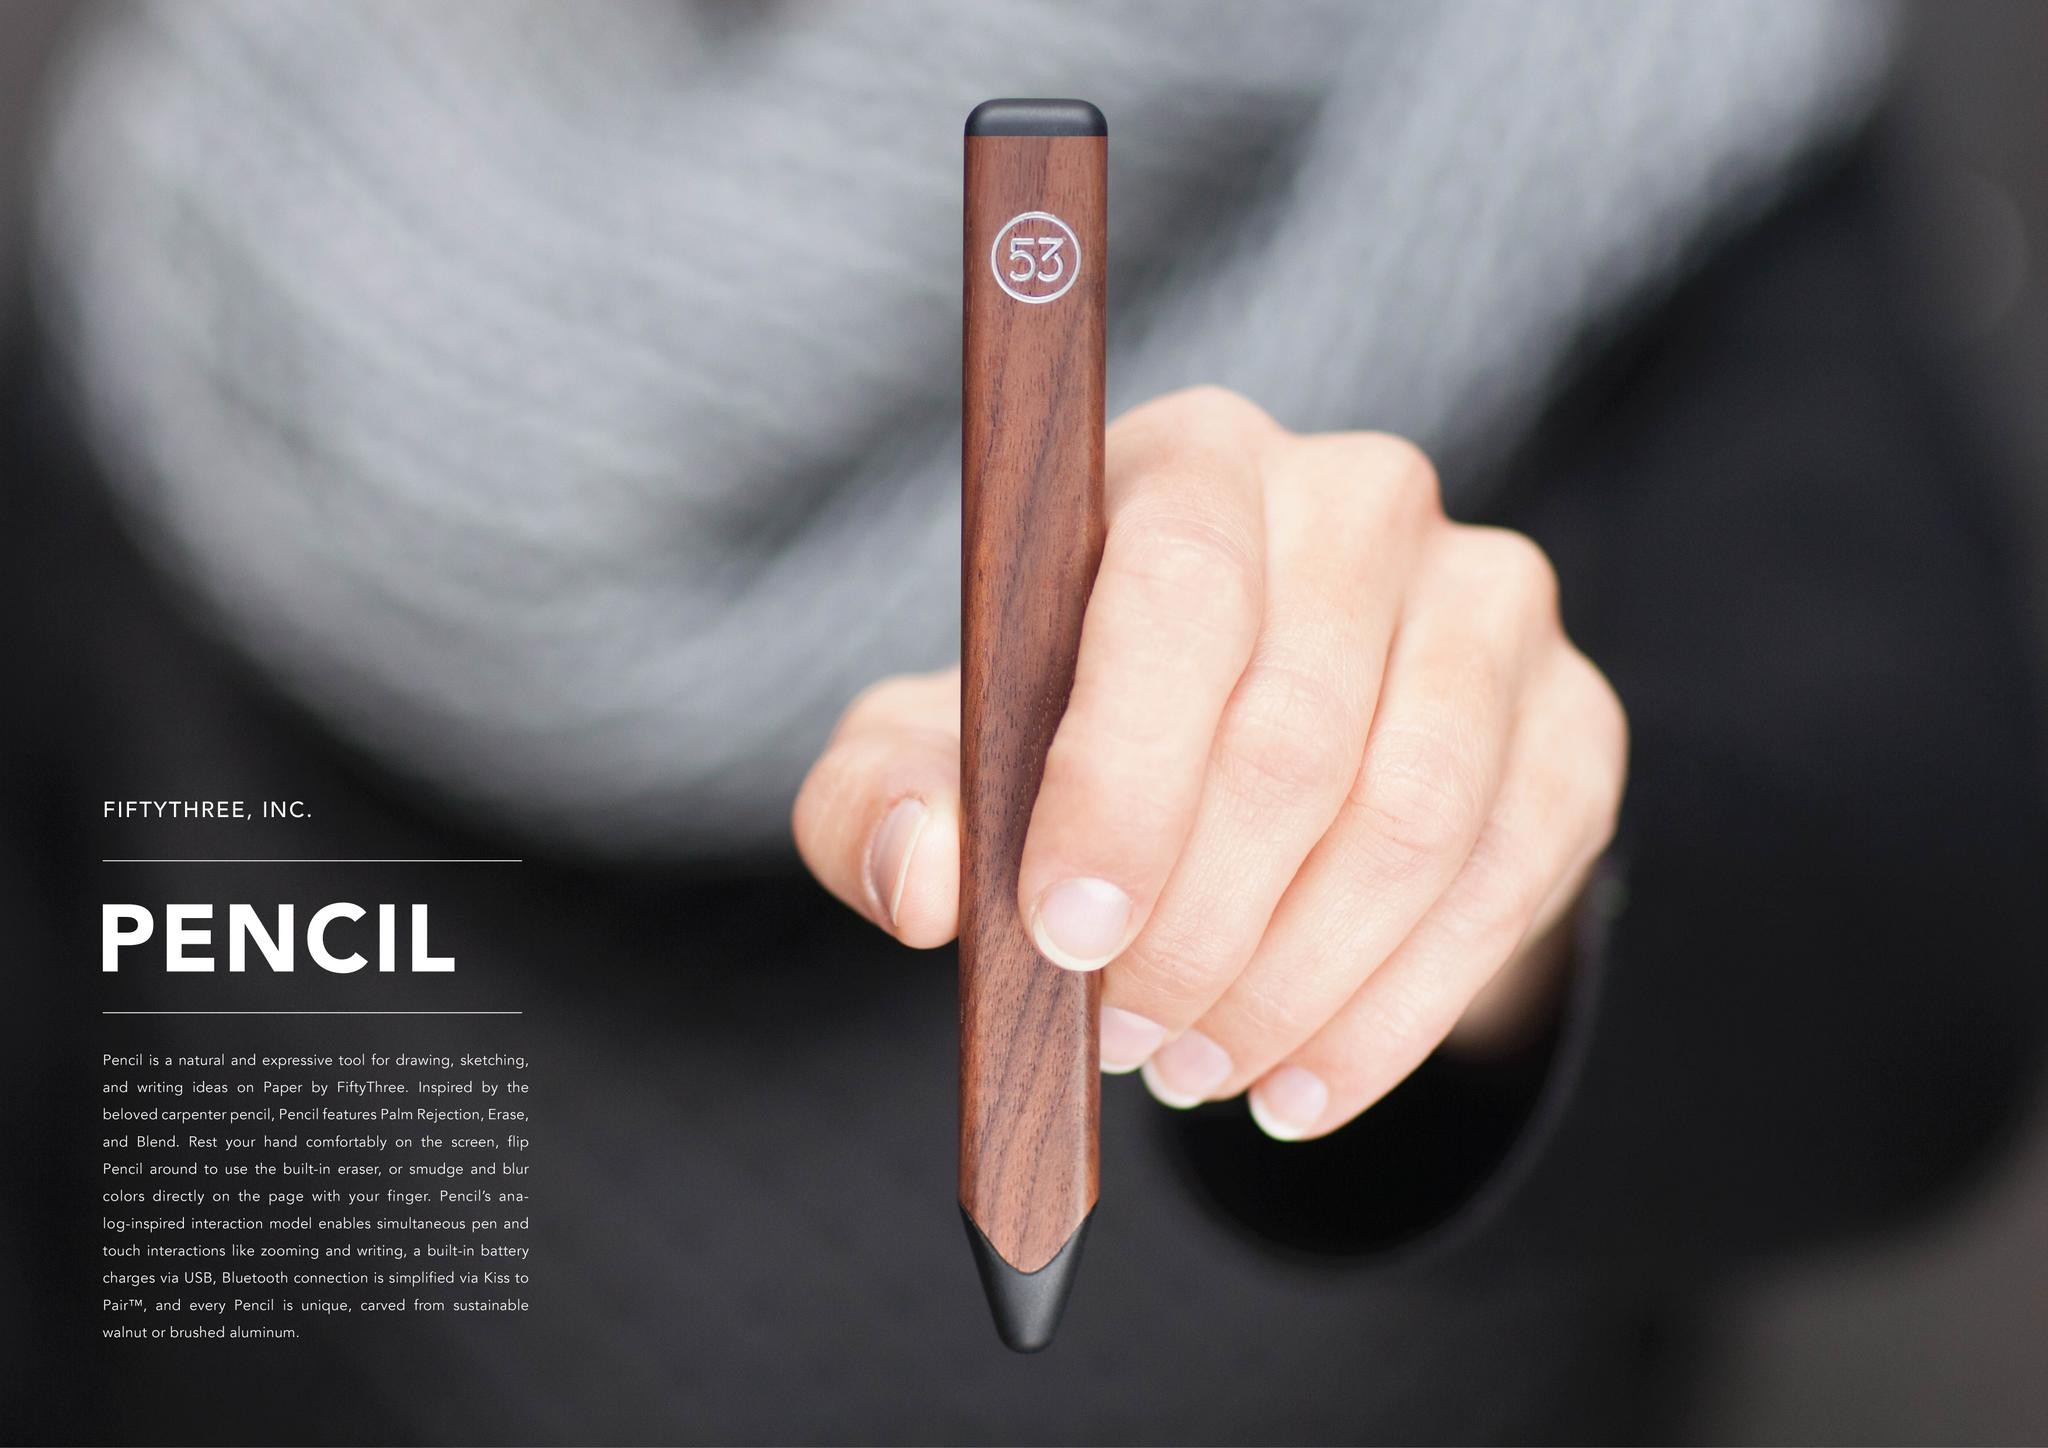 PENCIL BY FIFTYTHREE